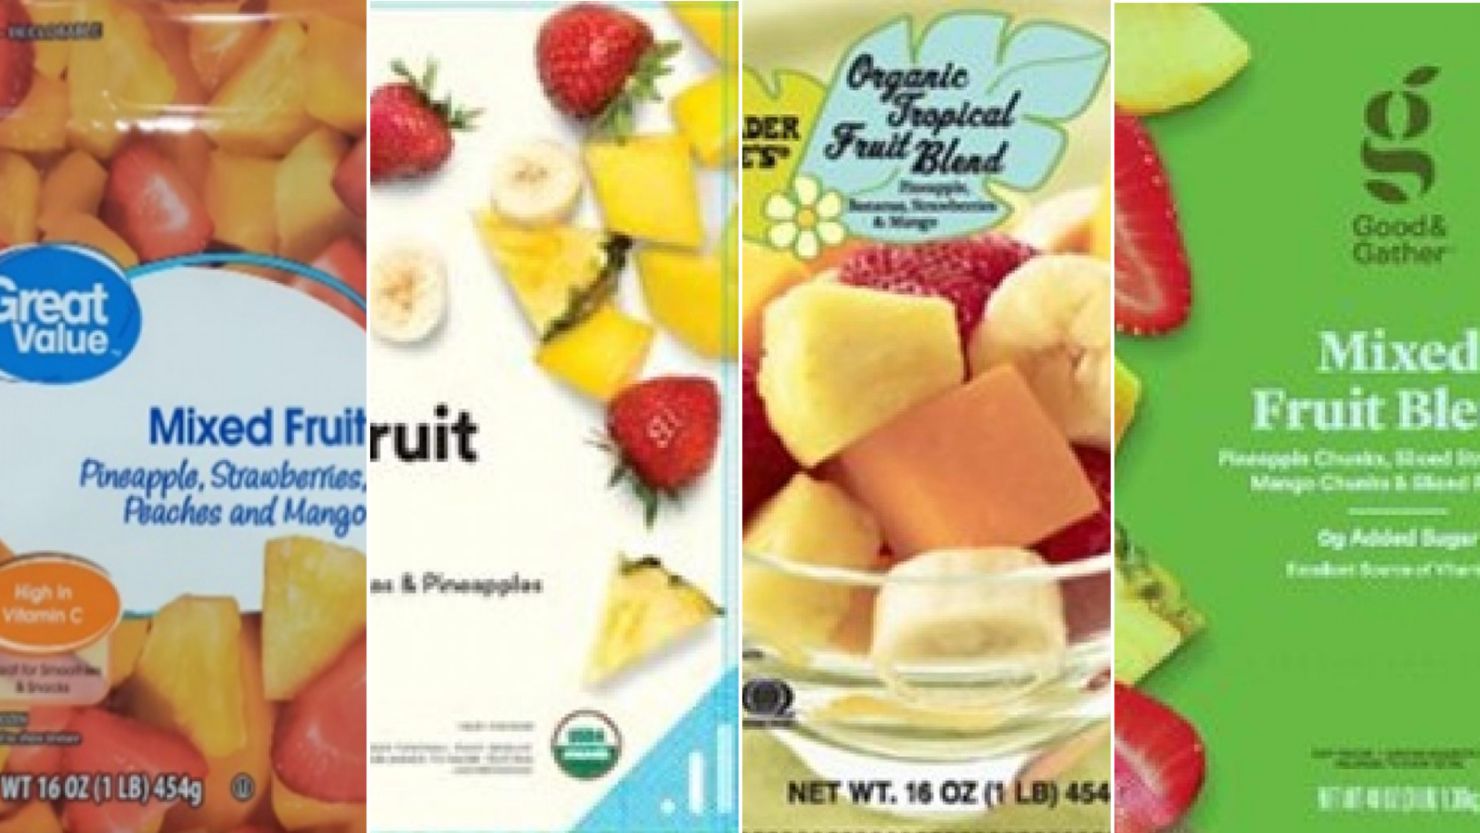 Frozen Fruit Sold Nationwide Recalled Due to Listeria